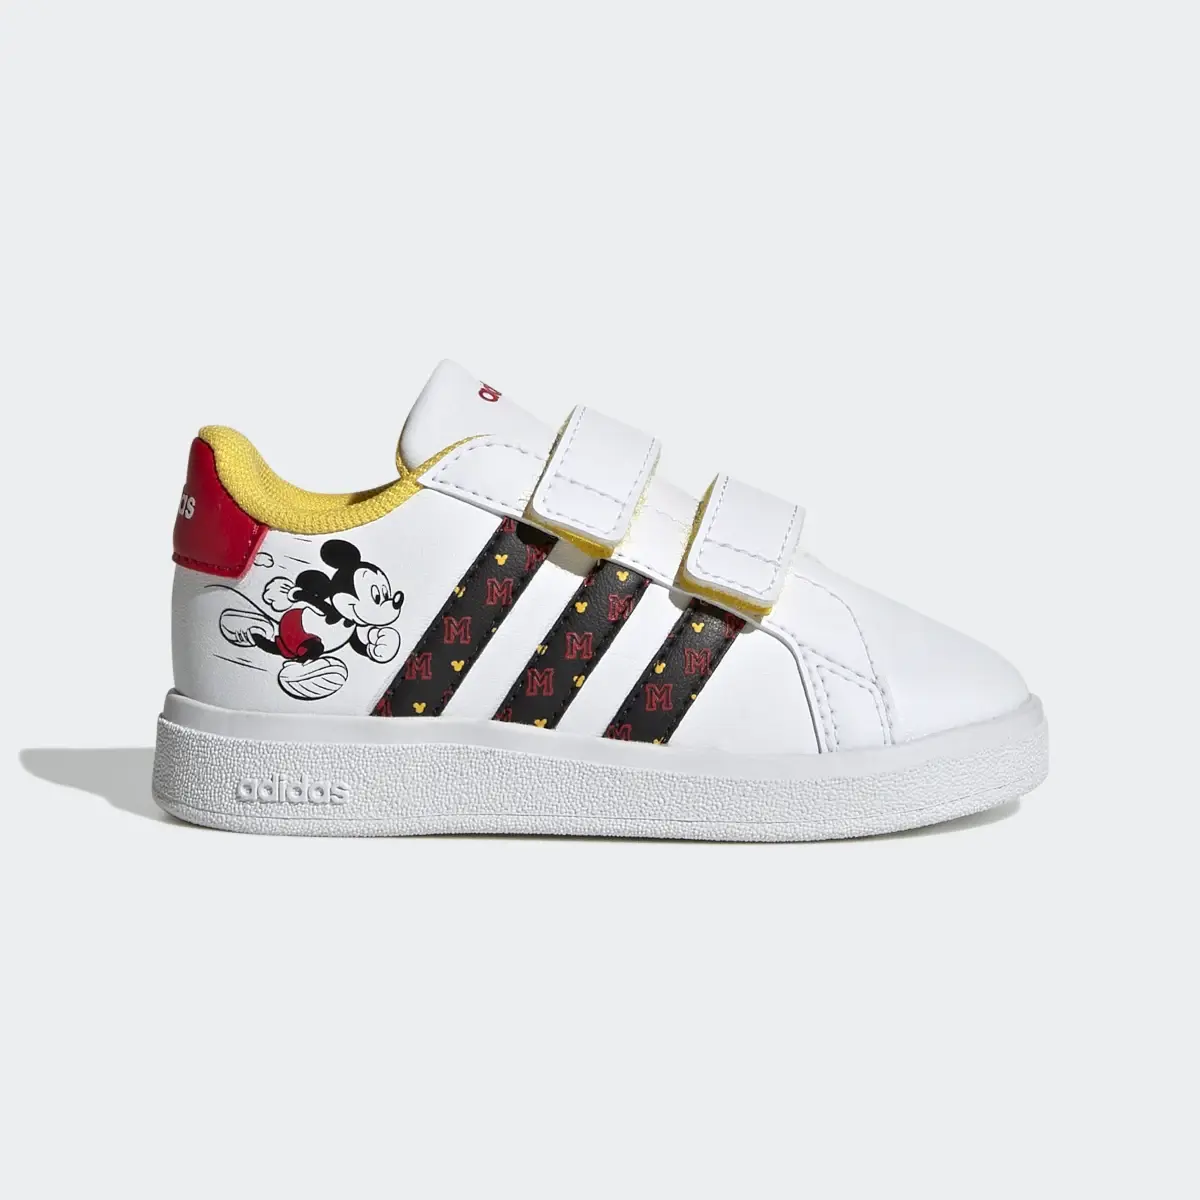 Adidas x Disney Grand Court Mickey Hook-and-Loop Shoes. 2